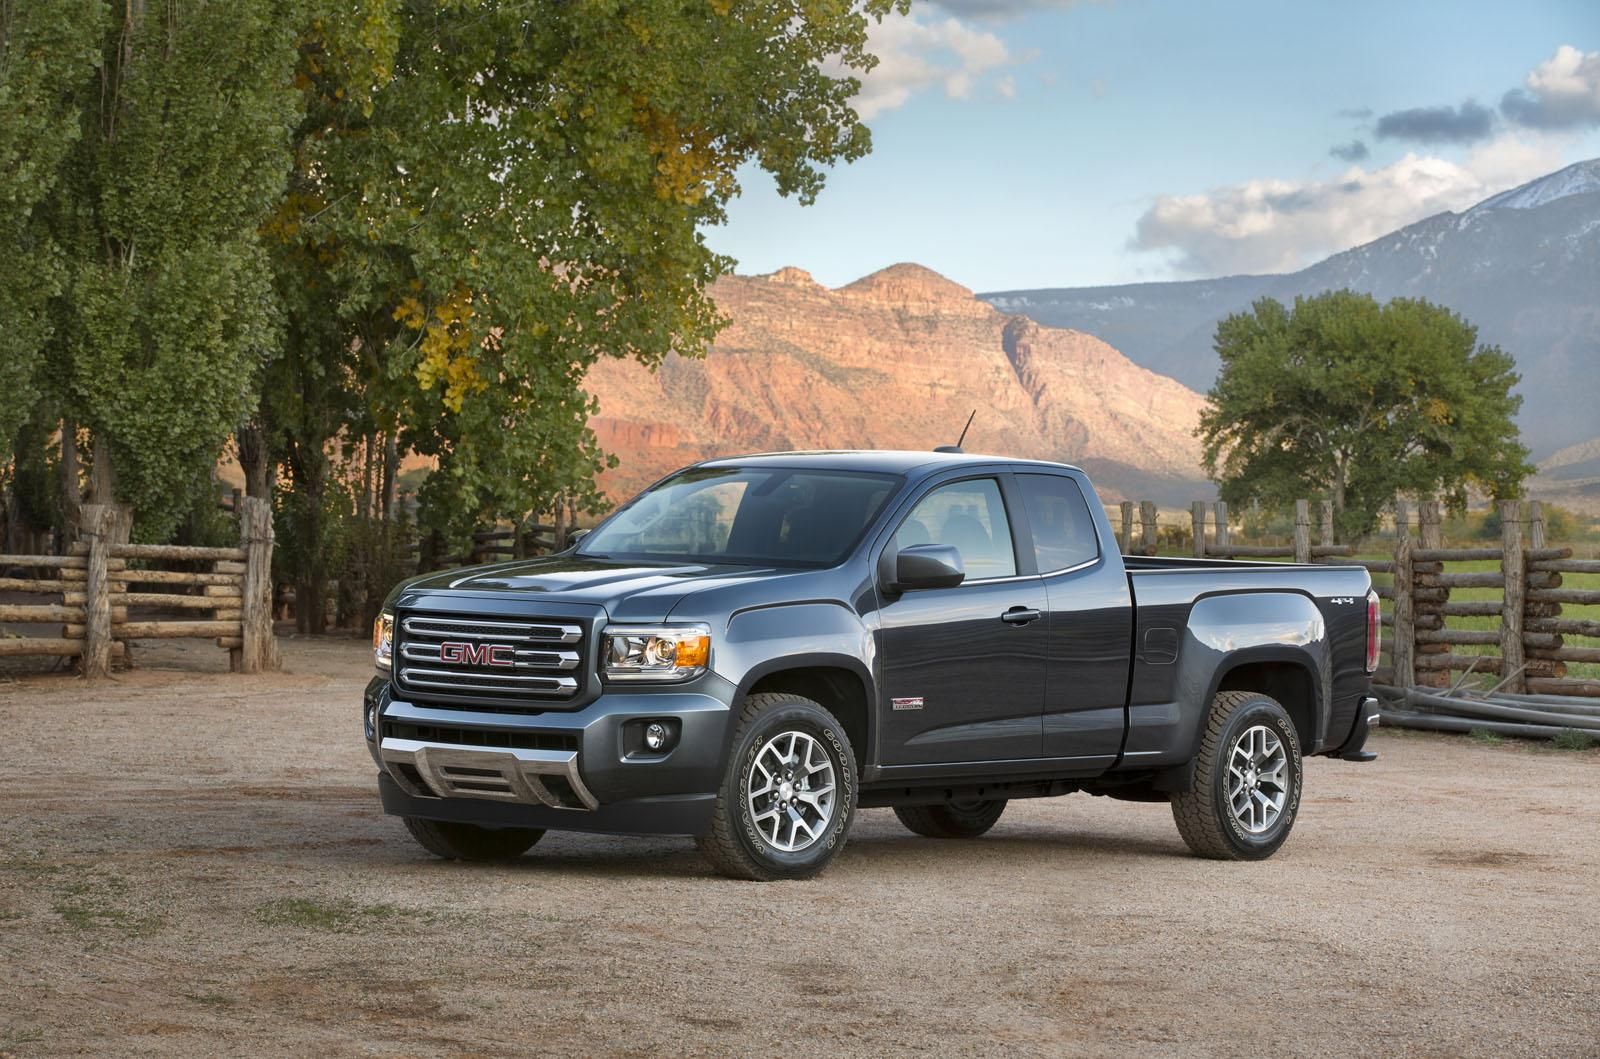 2015 GMC CANYON RESM GALERS